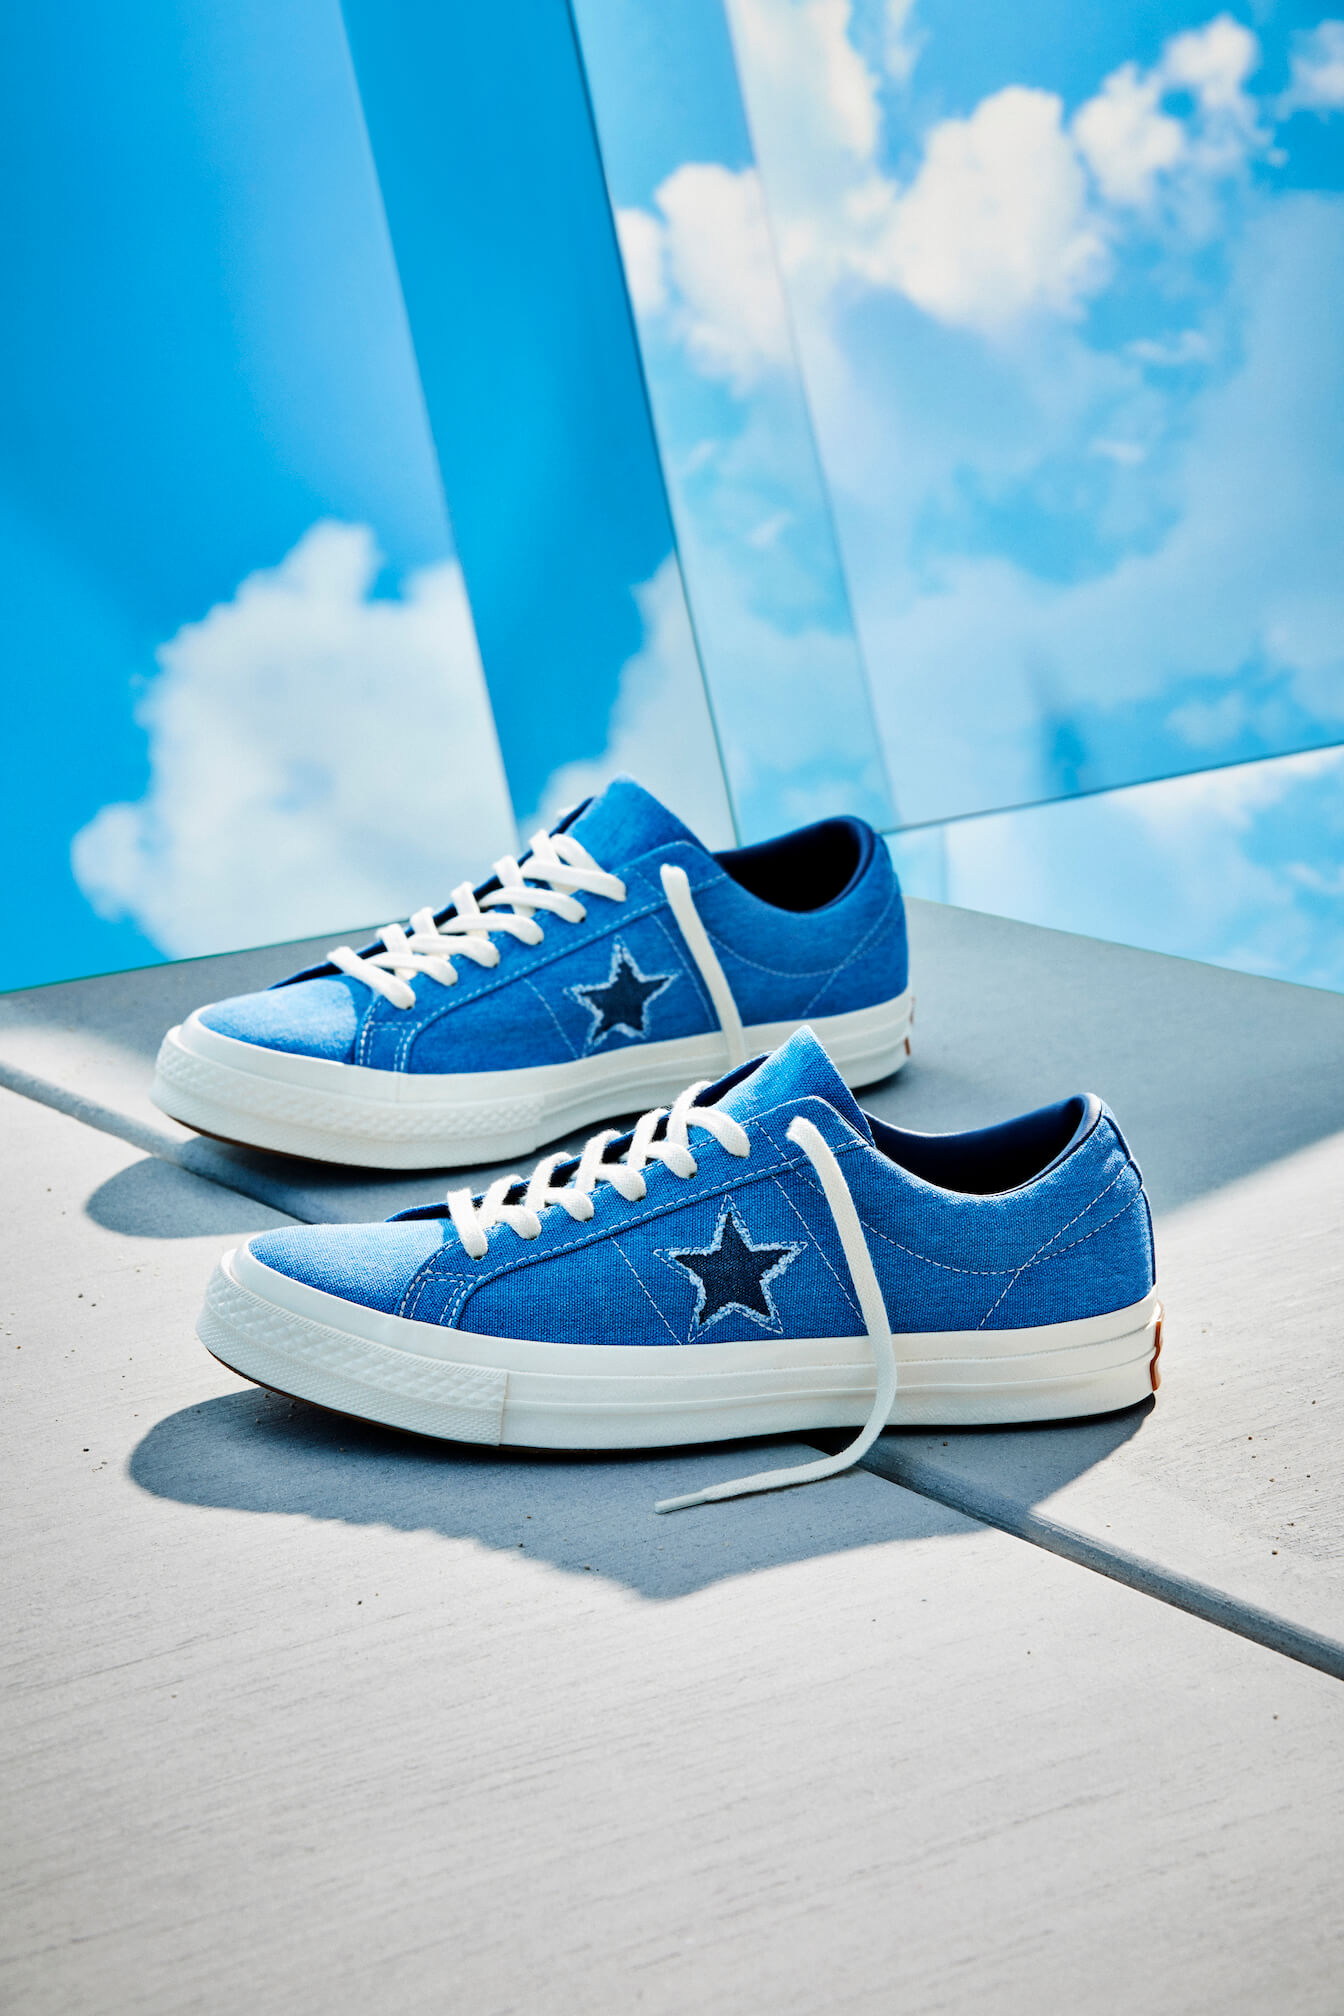 converse one star sunbaked